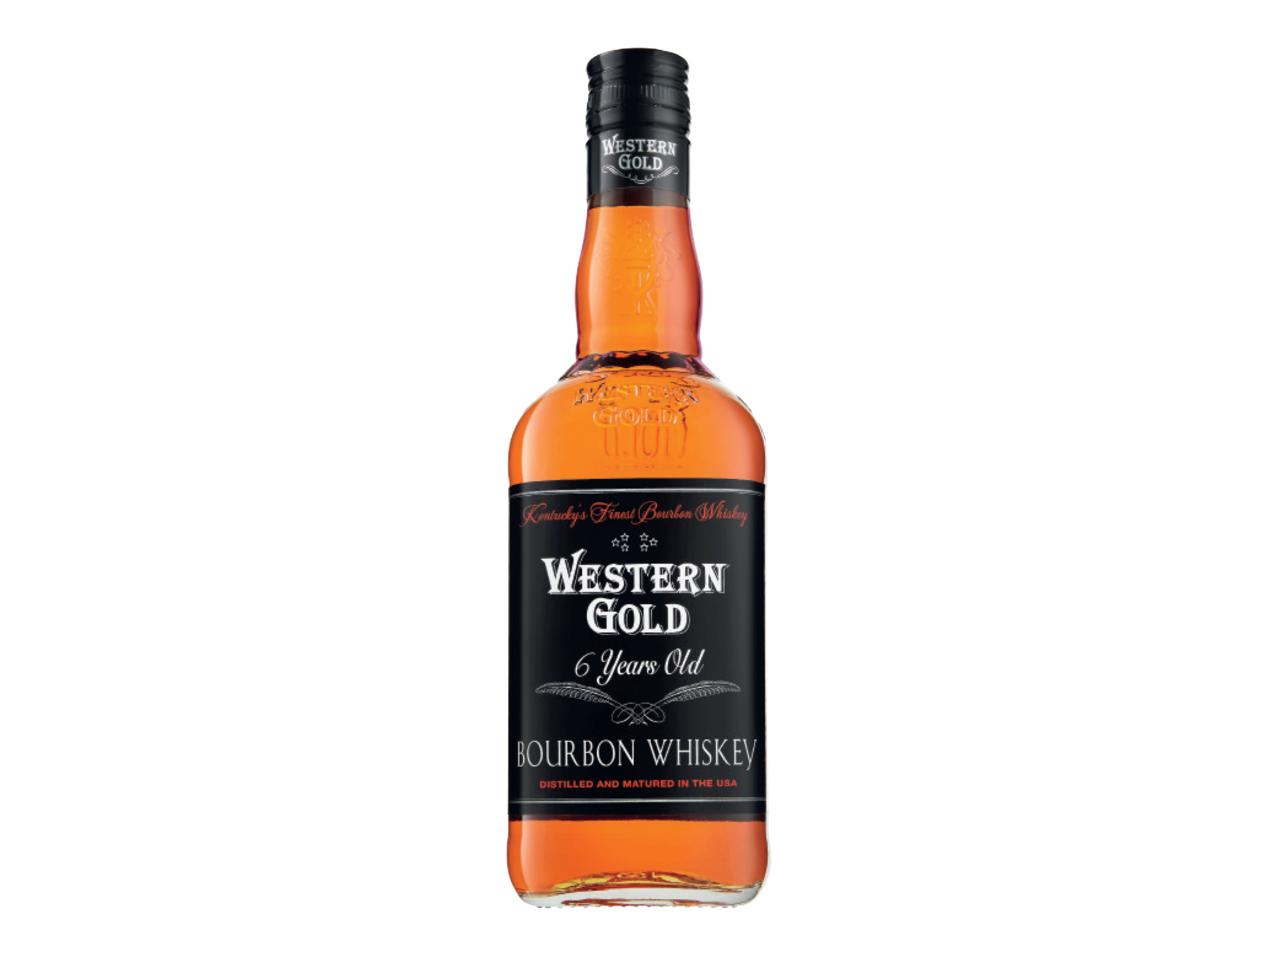 WESTERN GOLD 6 Year Old Bourbon Whiskey